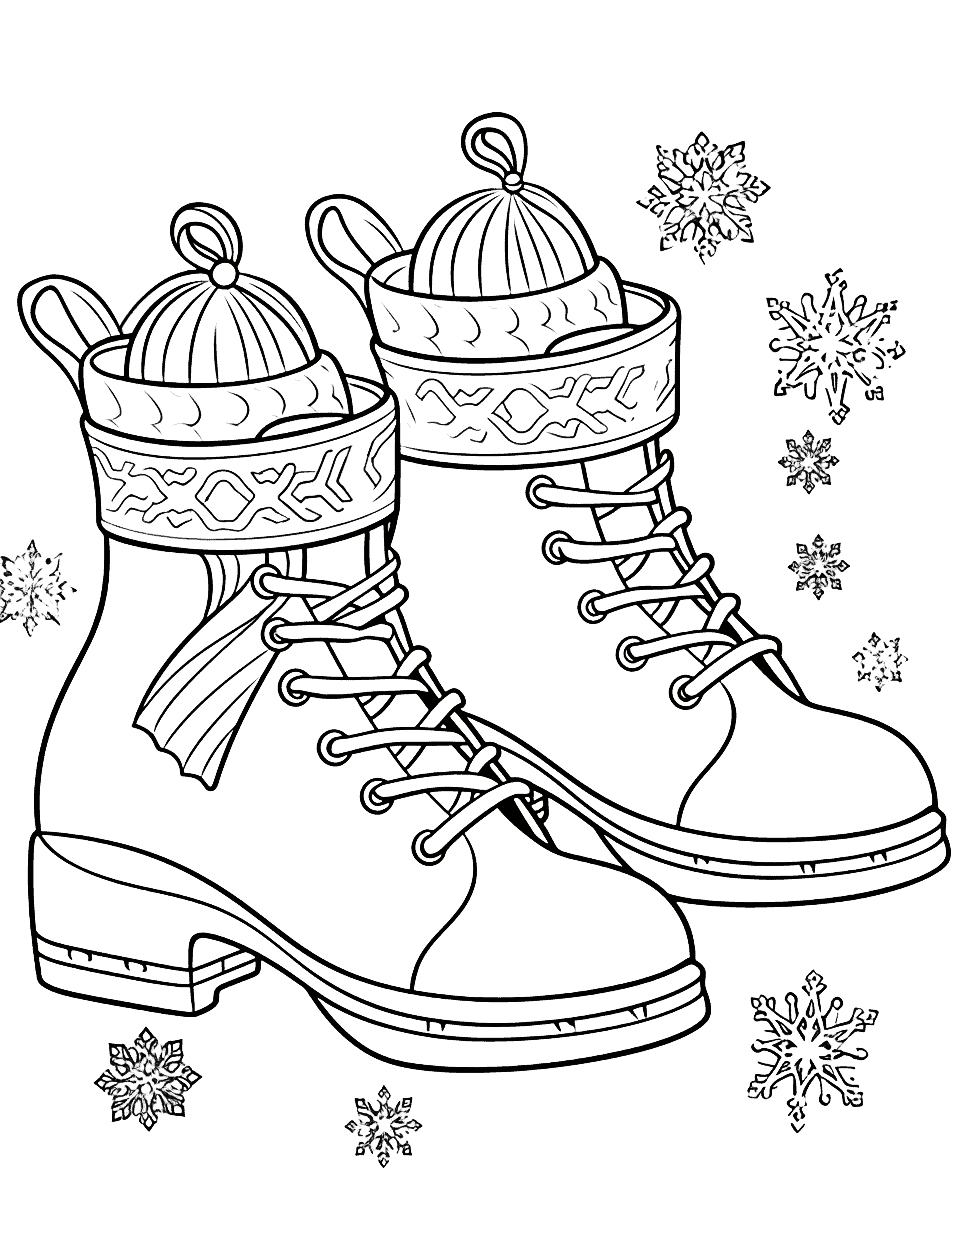 Ice Boots Winter Coloring Page - Detailed design on a pair of magical ice skates.